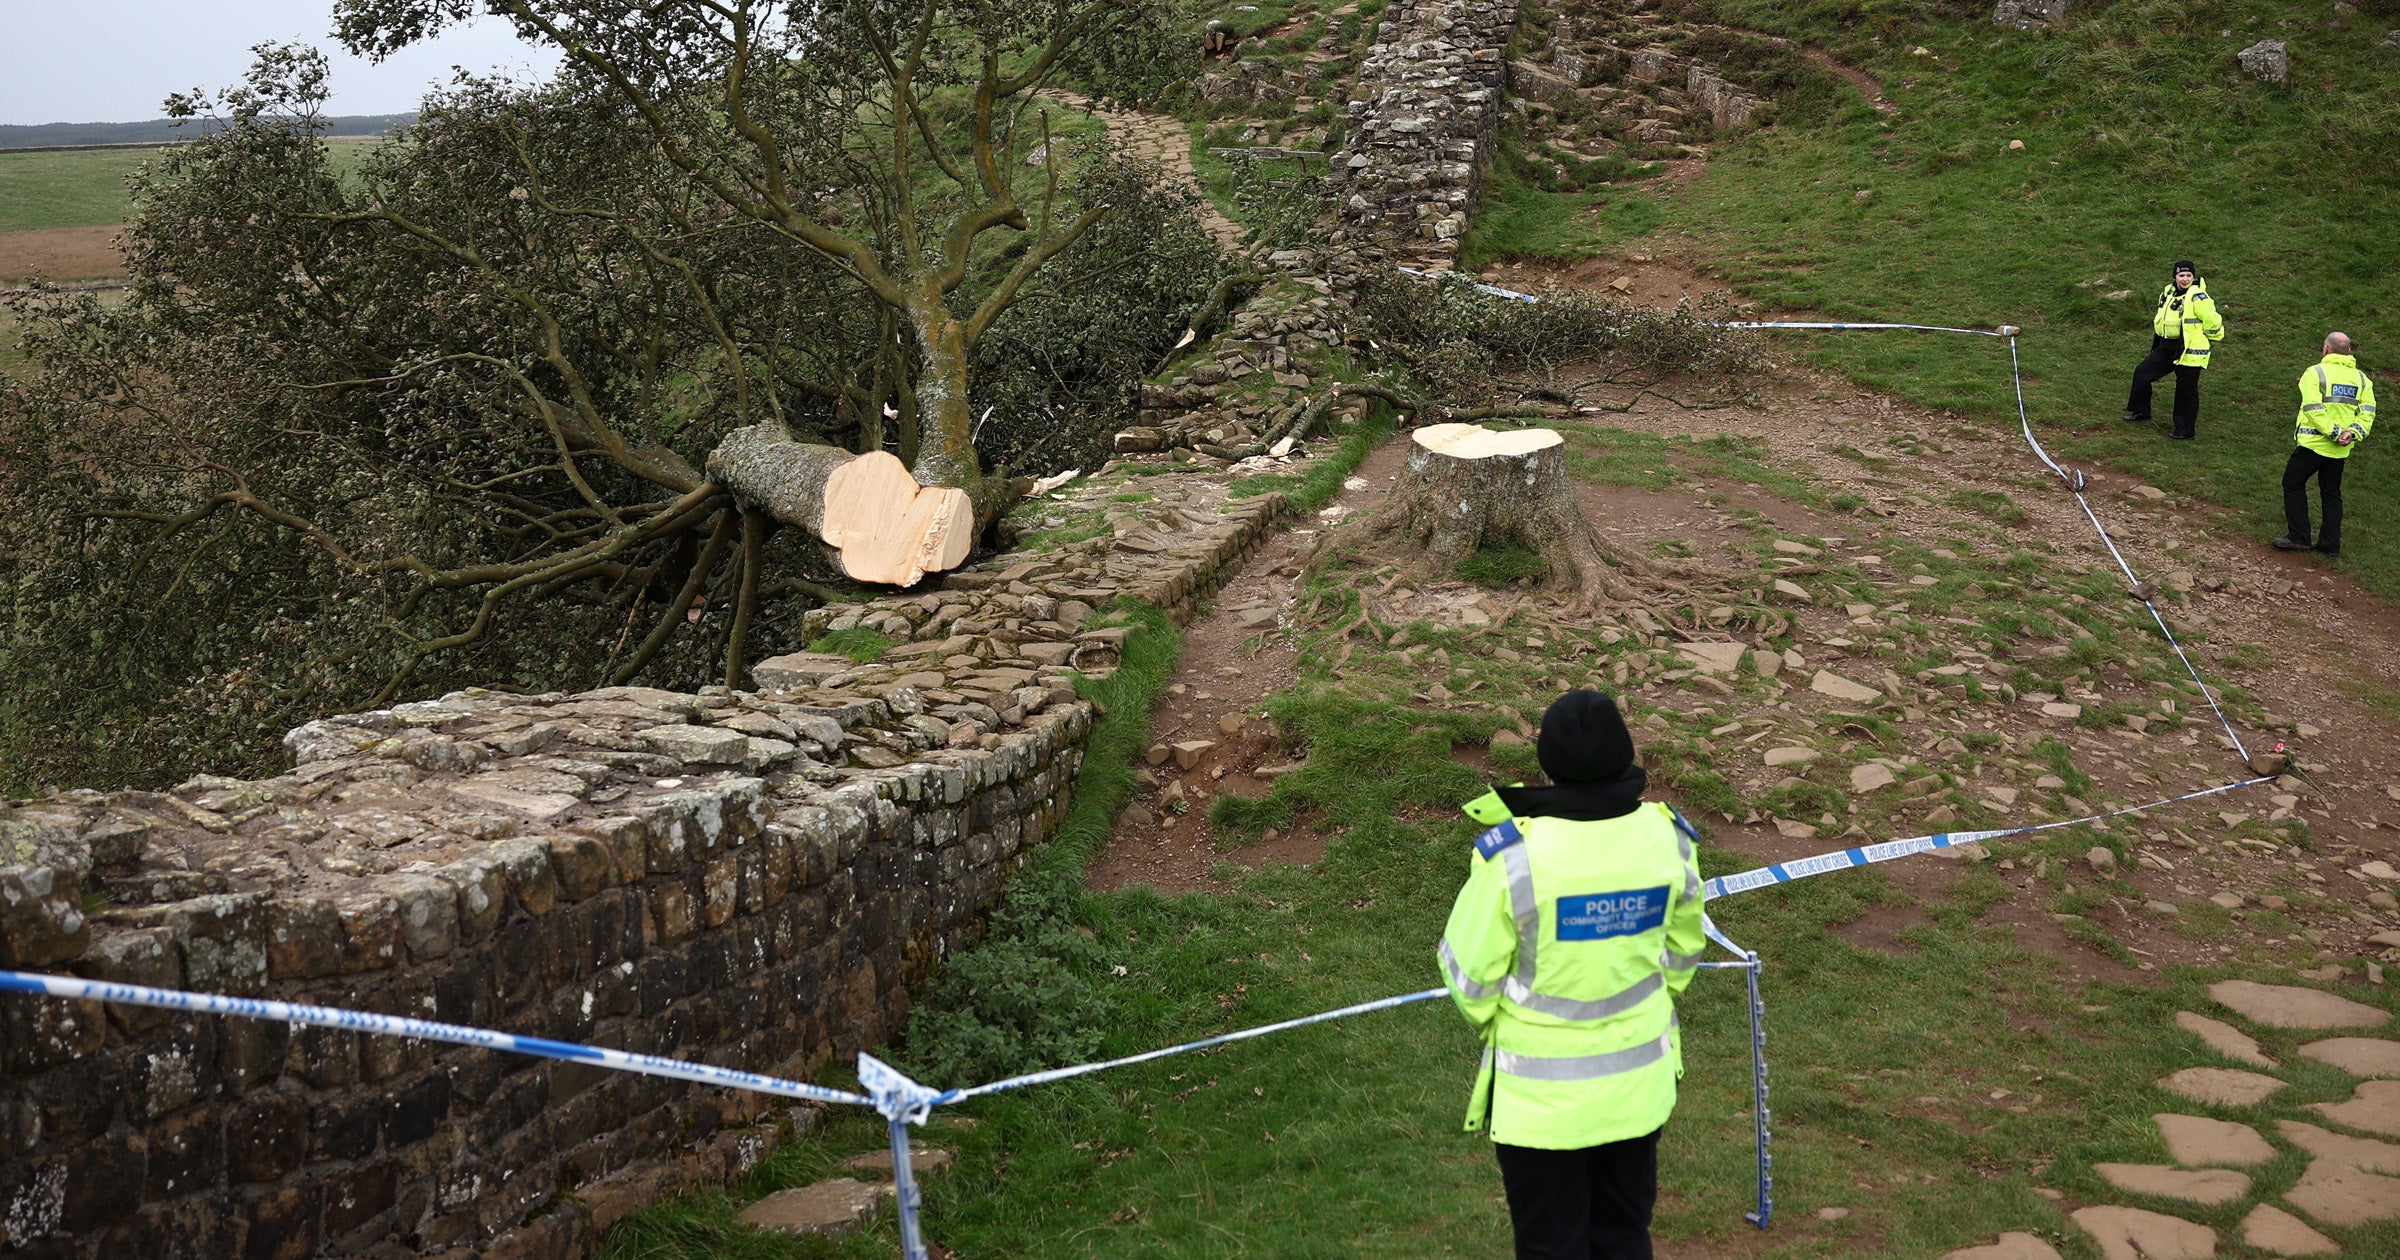 Reports first emerged that the tree had been felled overnight on 27 September